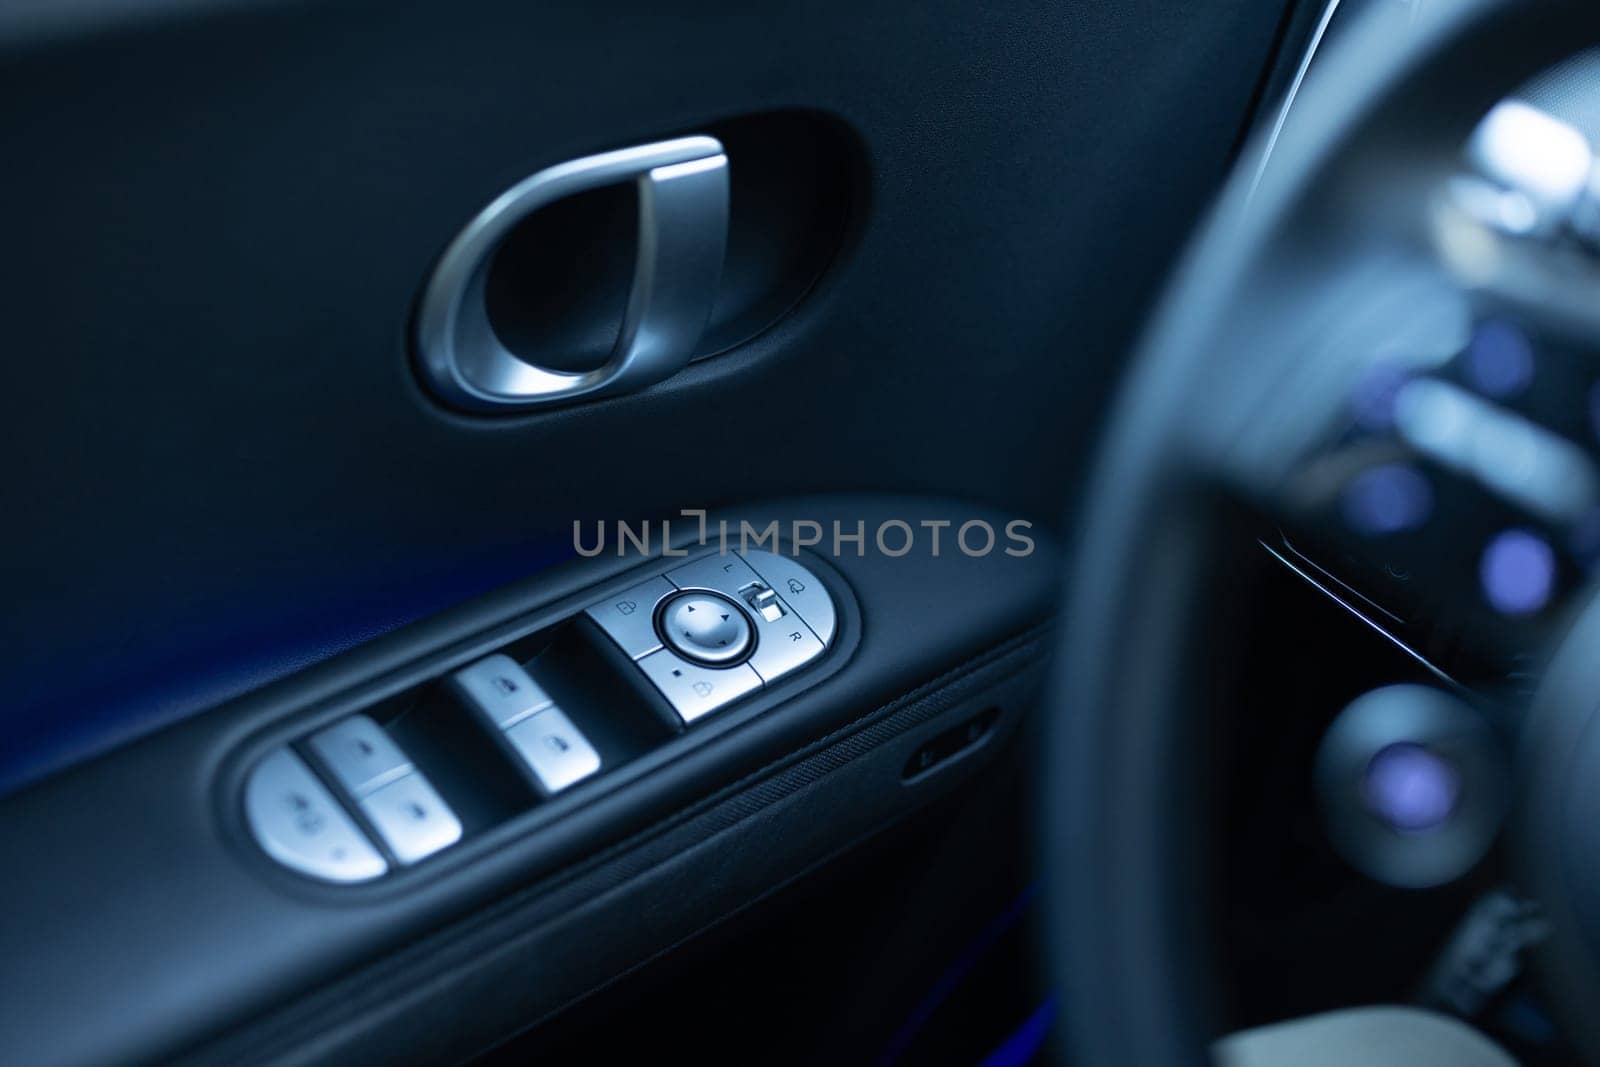 Window control buttons in modern luxury electric car. Car leather interior details of door handle with windows controls and adjustments. Car window controls. Door handle with power window control by uflypro